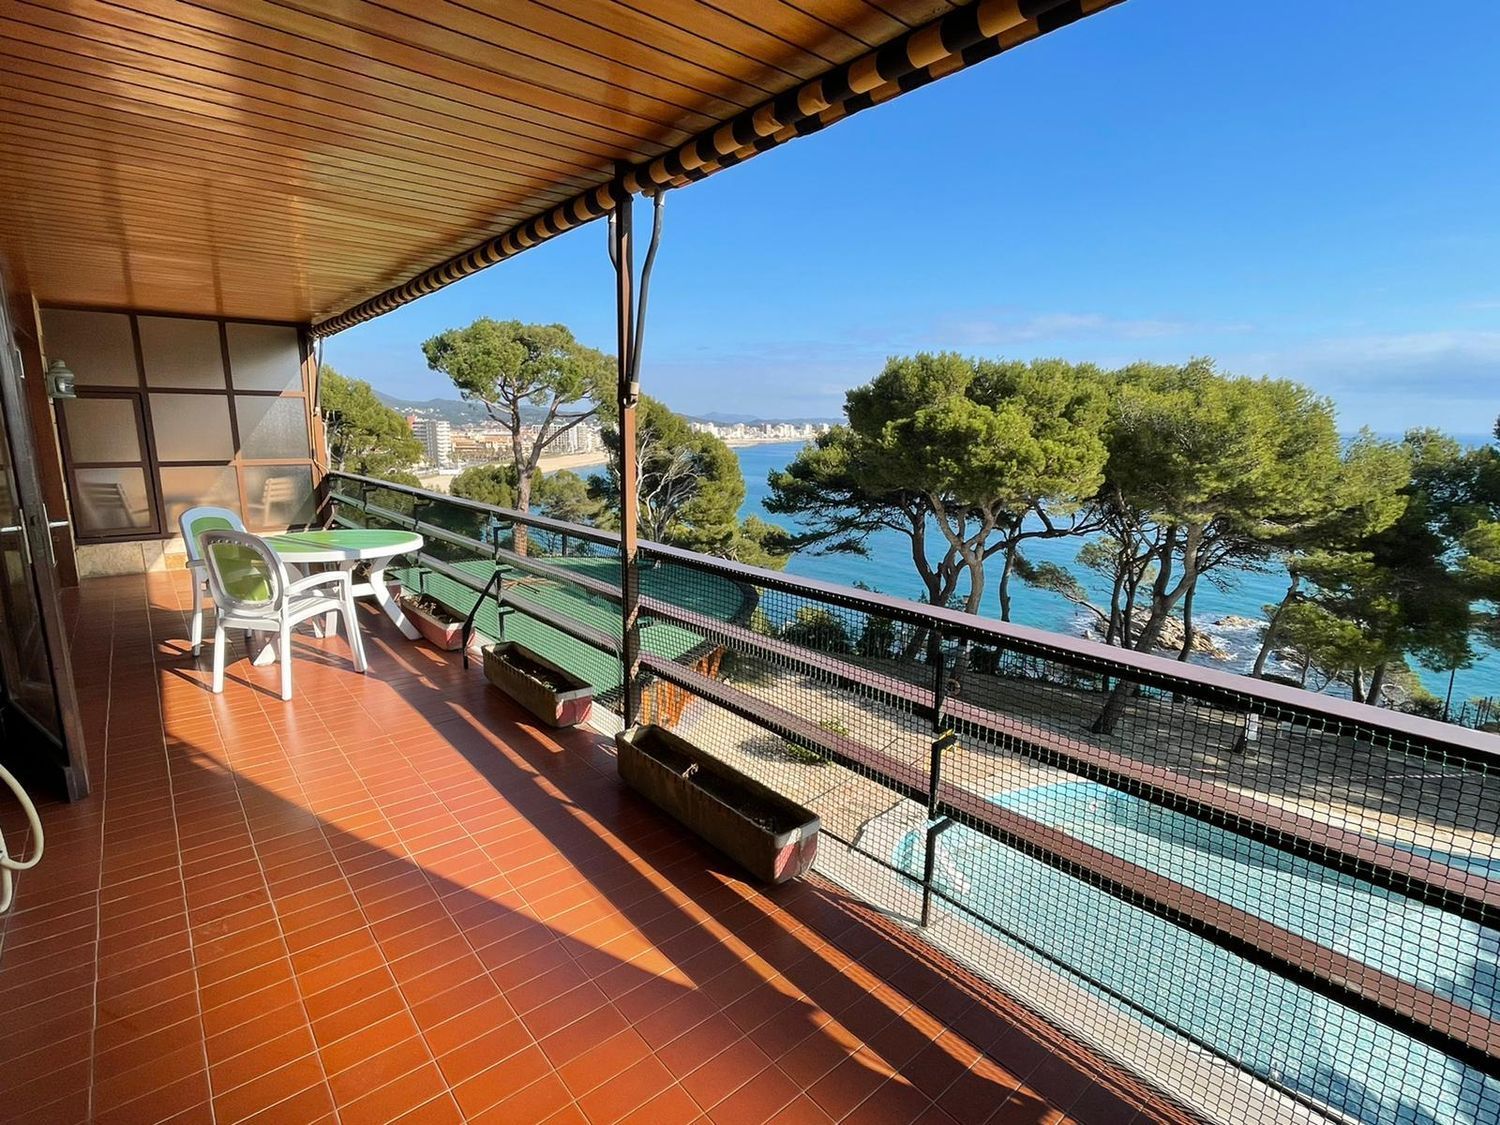 Apartment for sale on the seafront on Josep Lluís Sert street, in Calonge